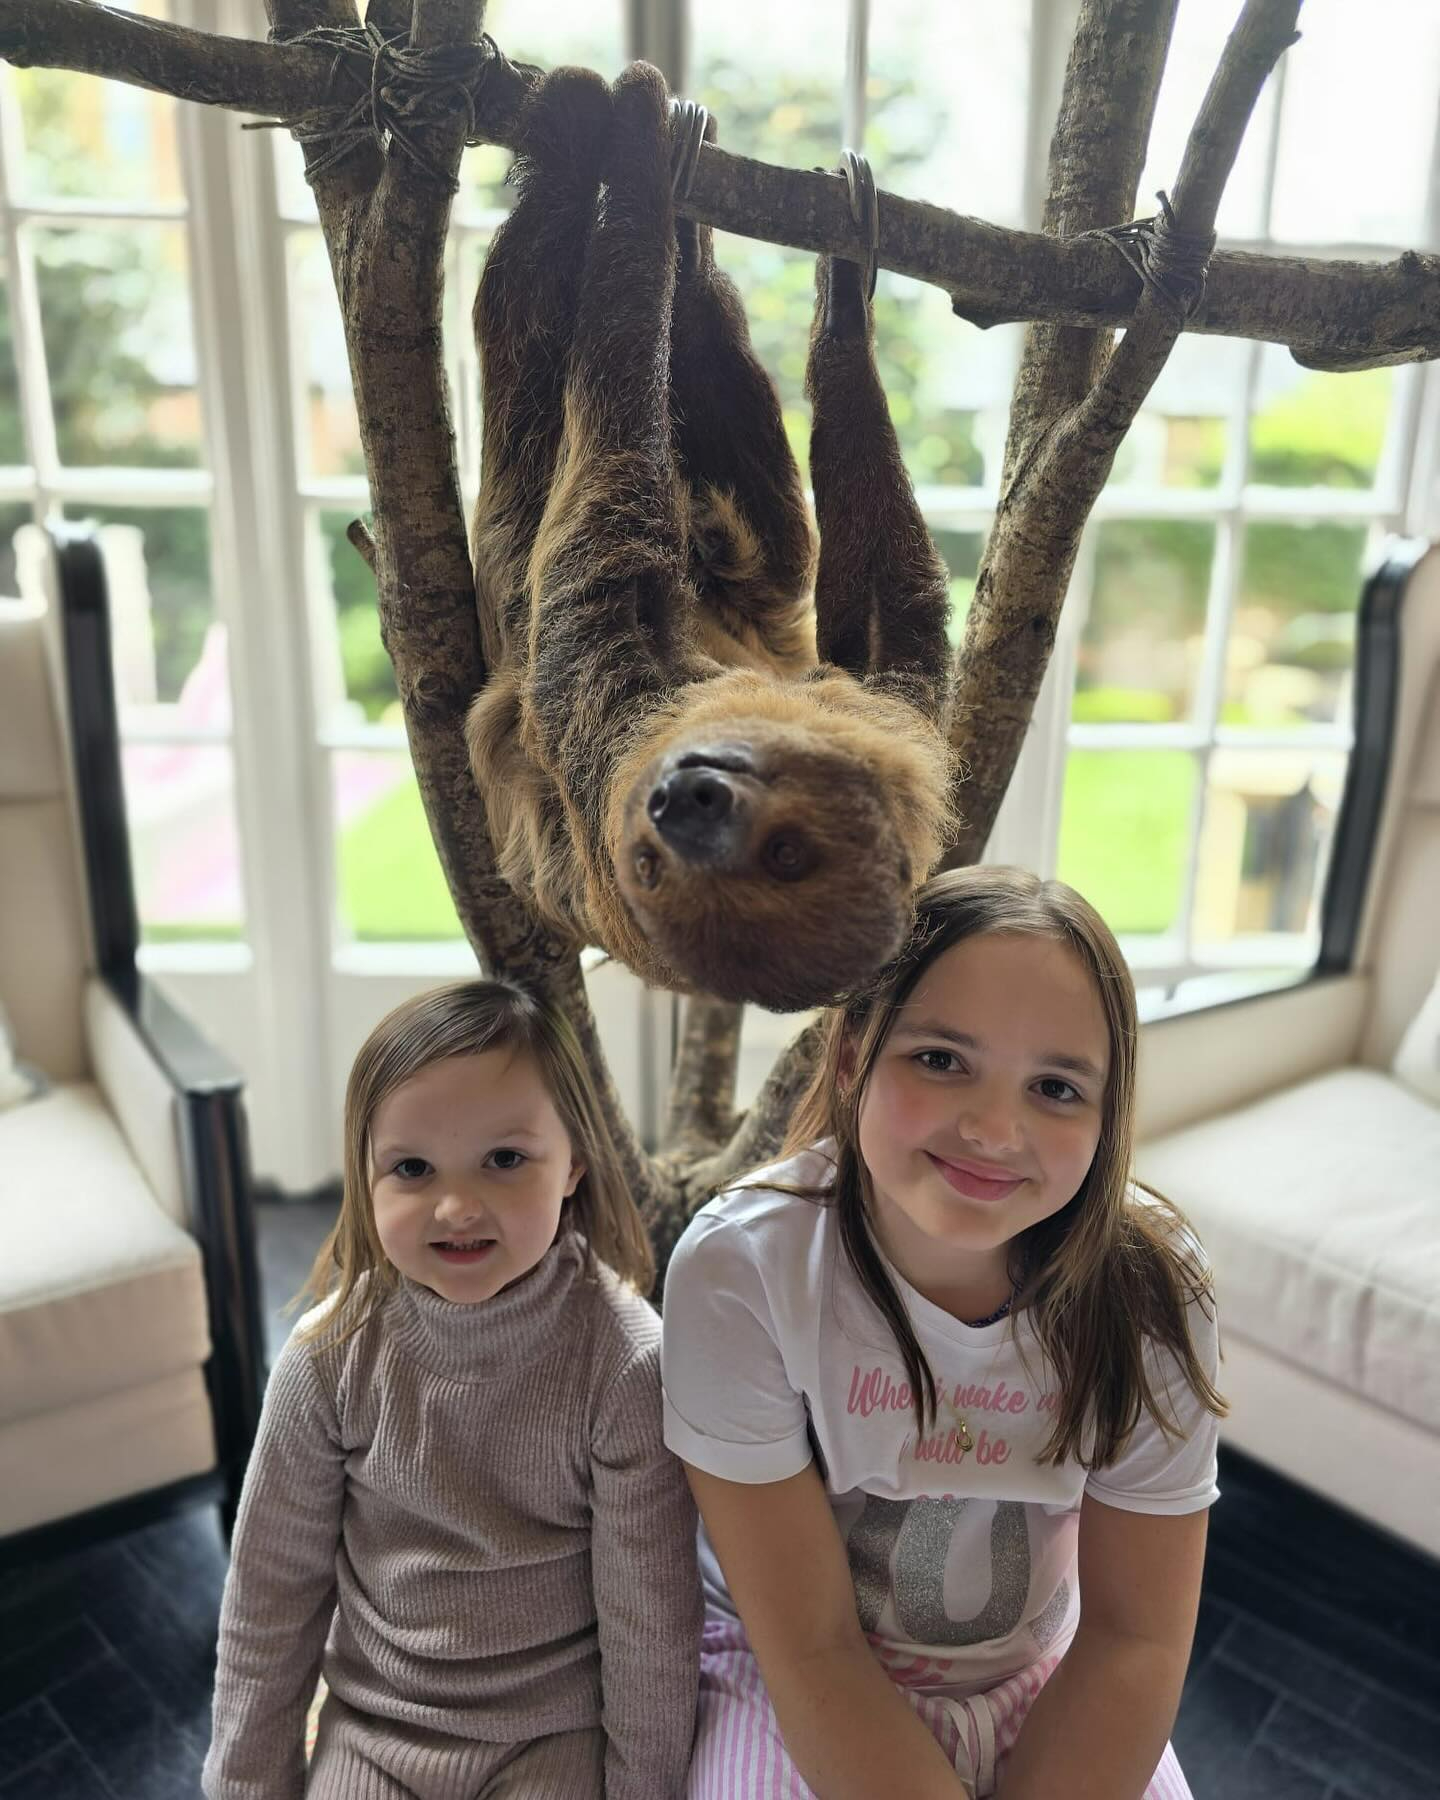 Socialite Tamara Ecclestone slammed by fans for buying exotic pet for her daughter